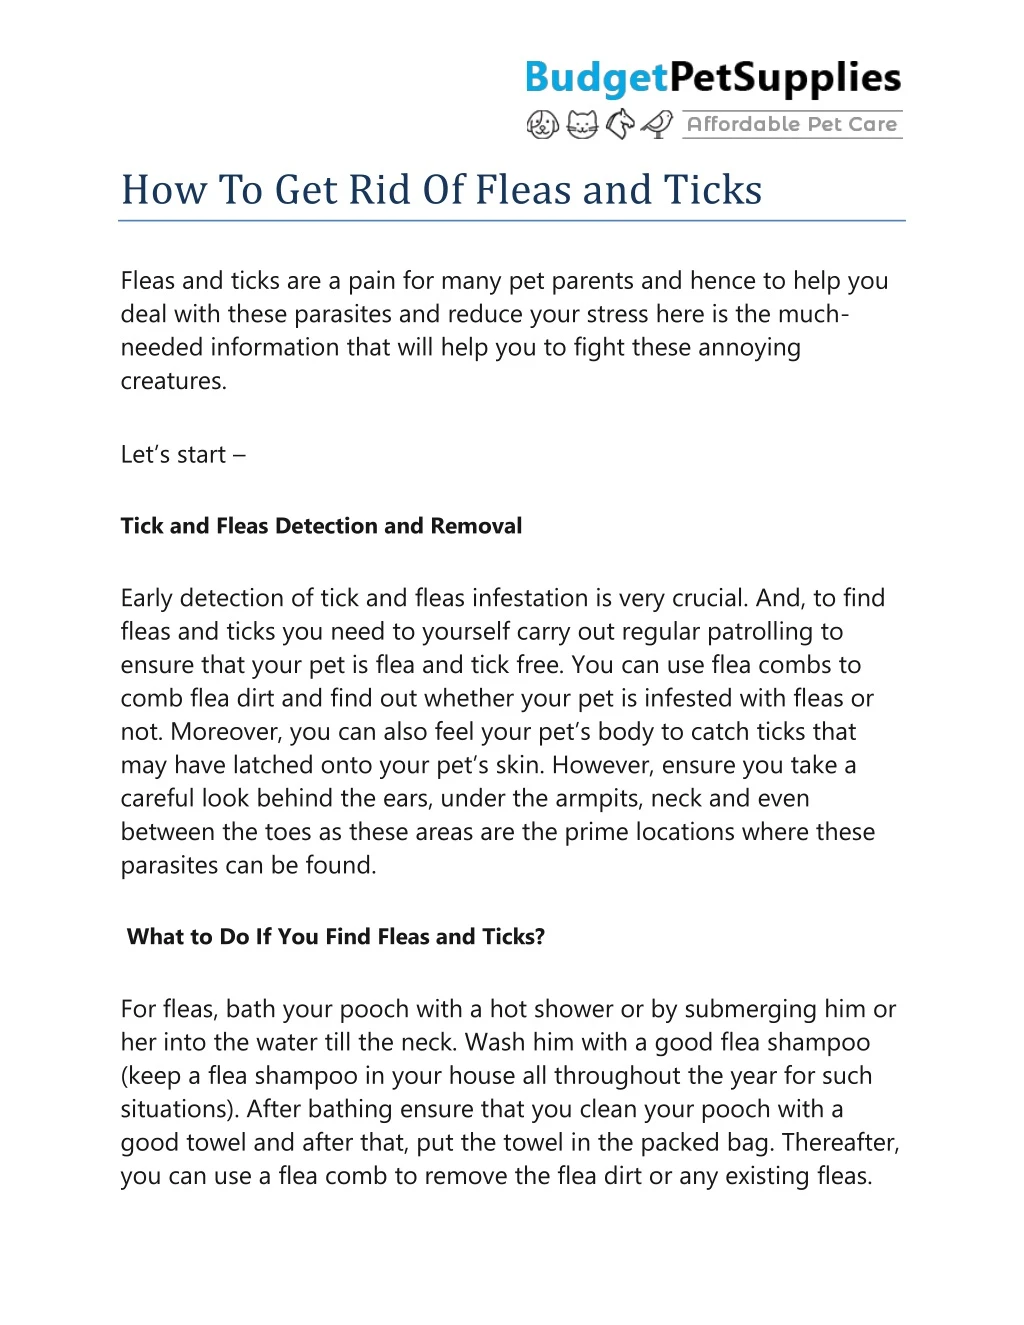 how to get rid of fleas and ticks